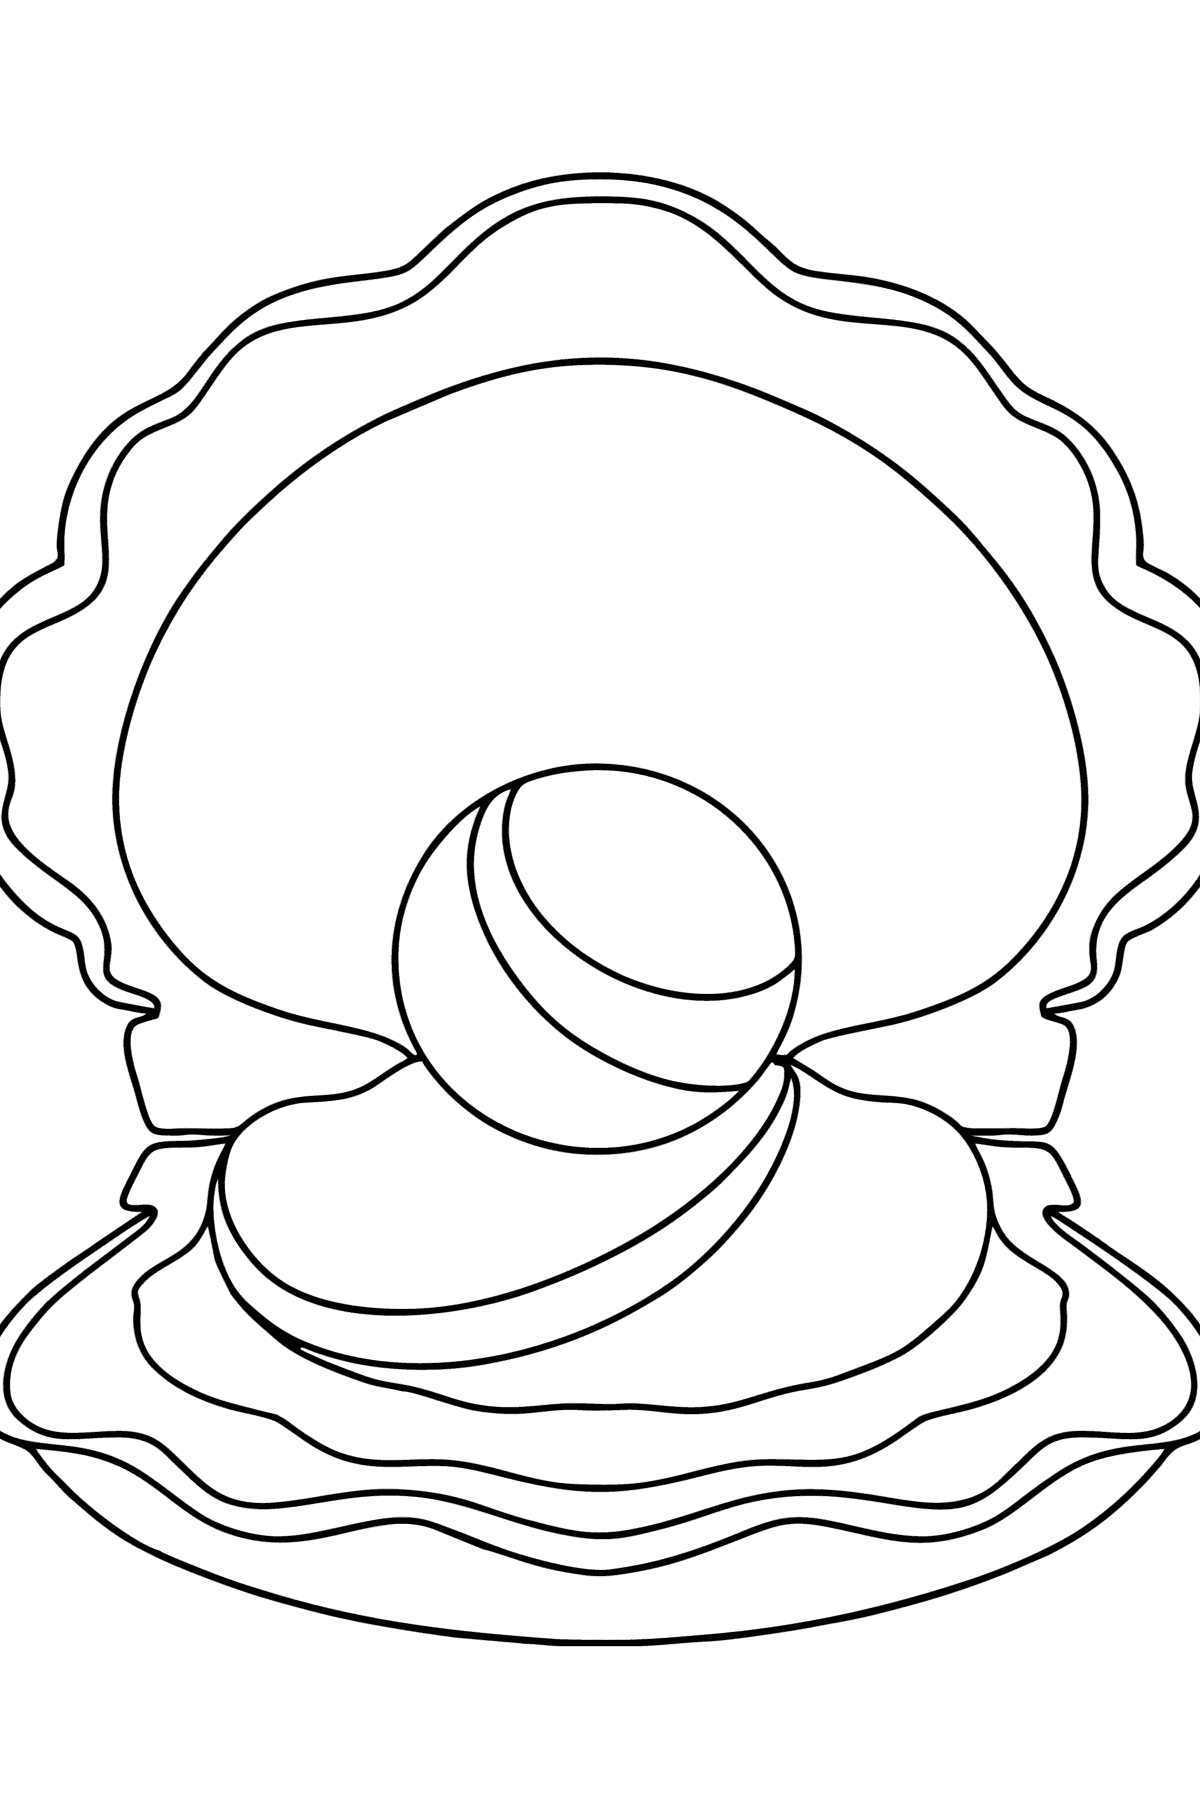 Shell with pearl coloring page - Coloring Pages for Kids